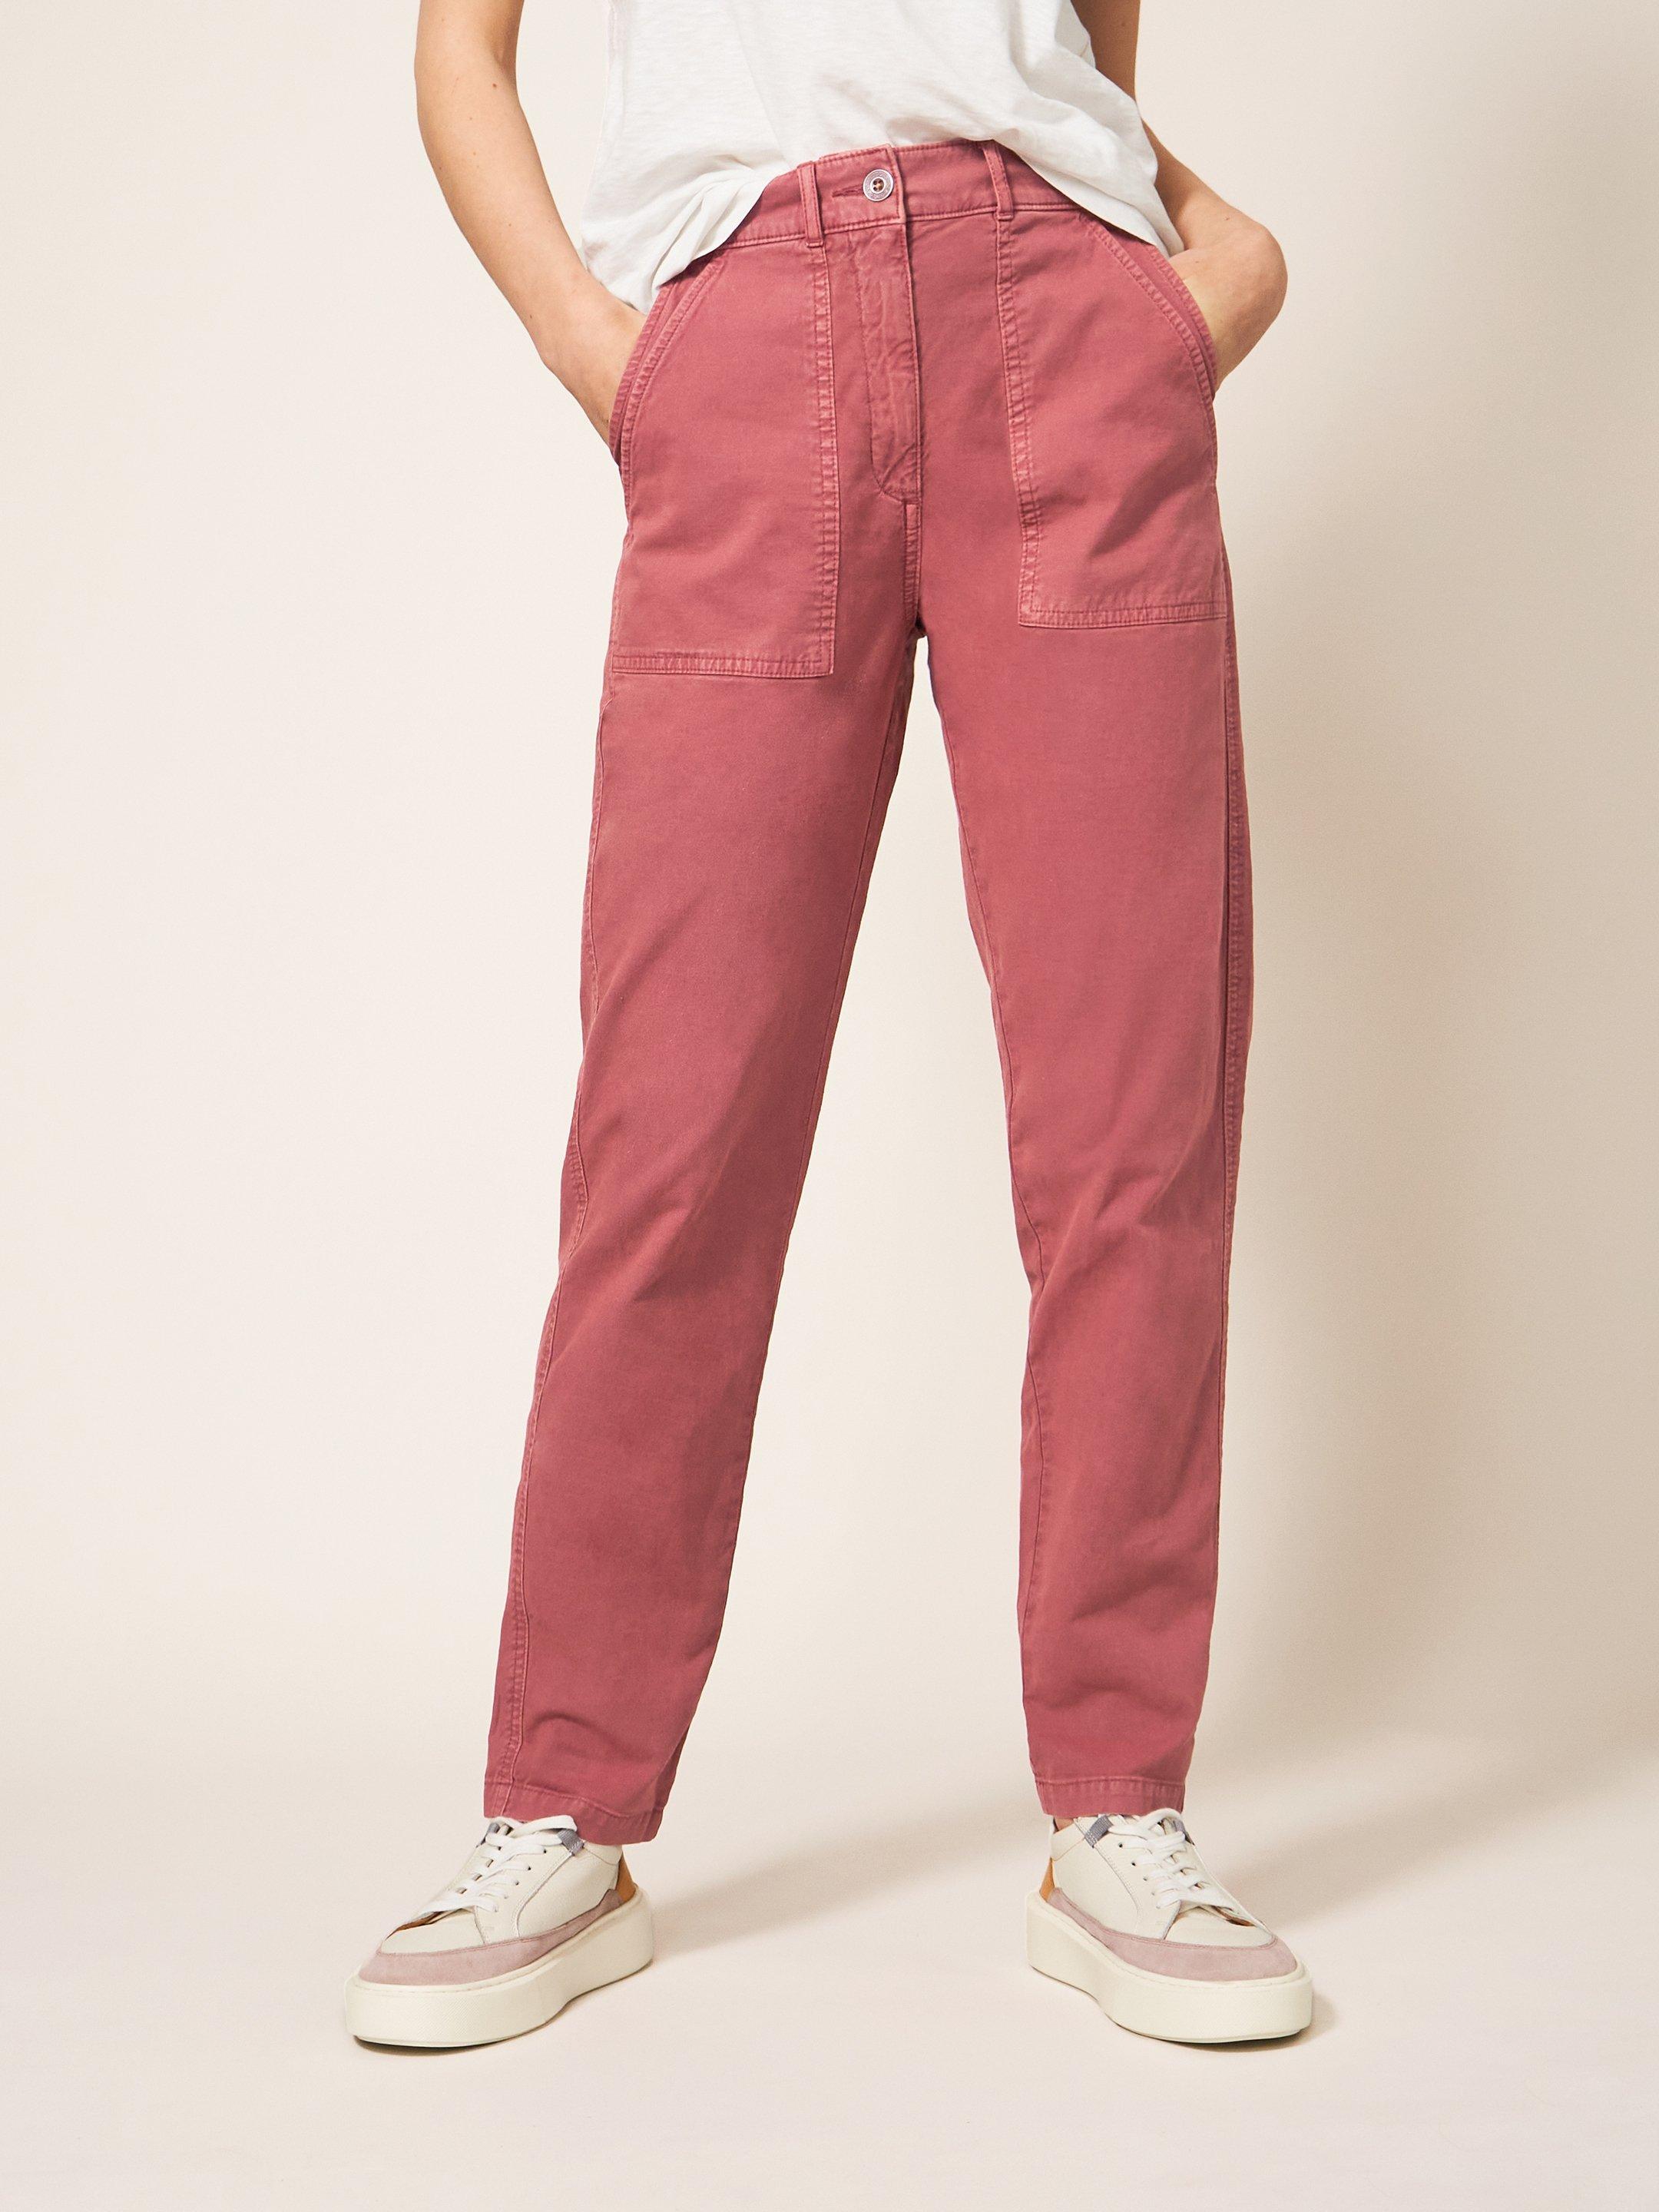 Twister Chino in MID PLUM - LIFESTYLE